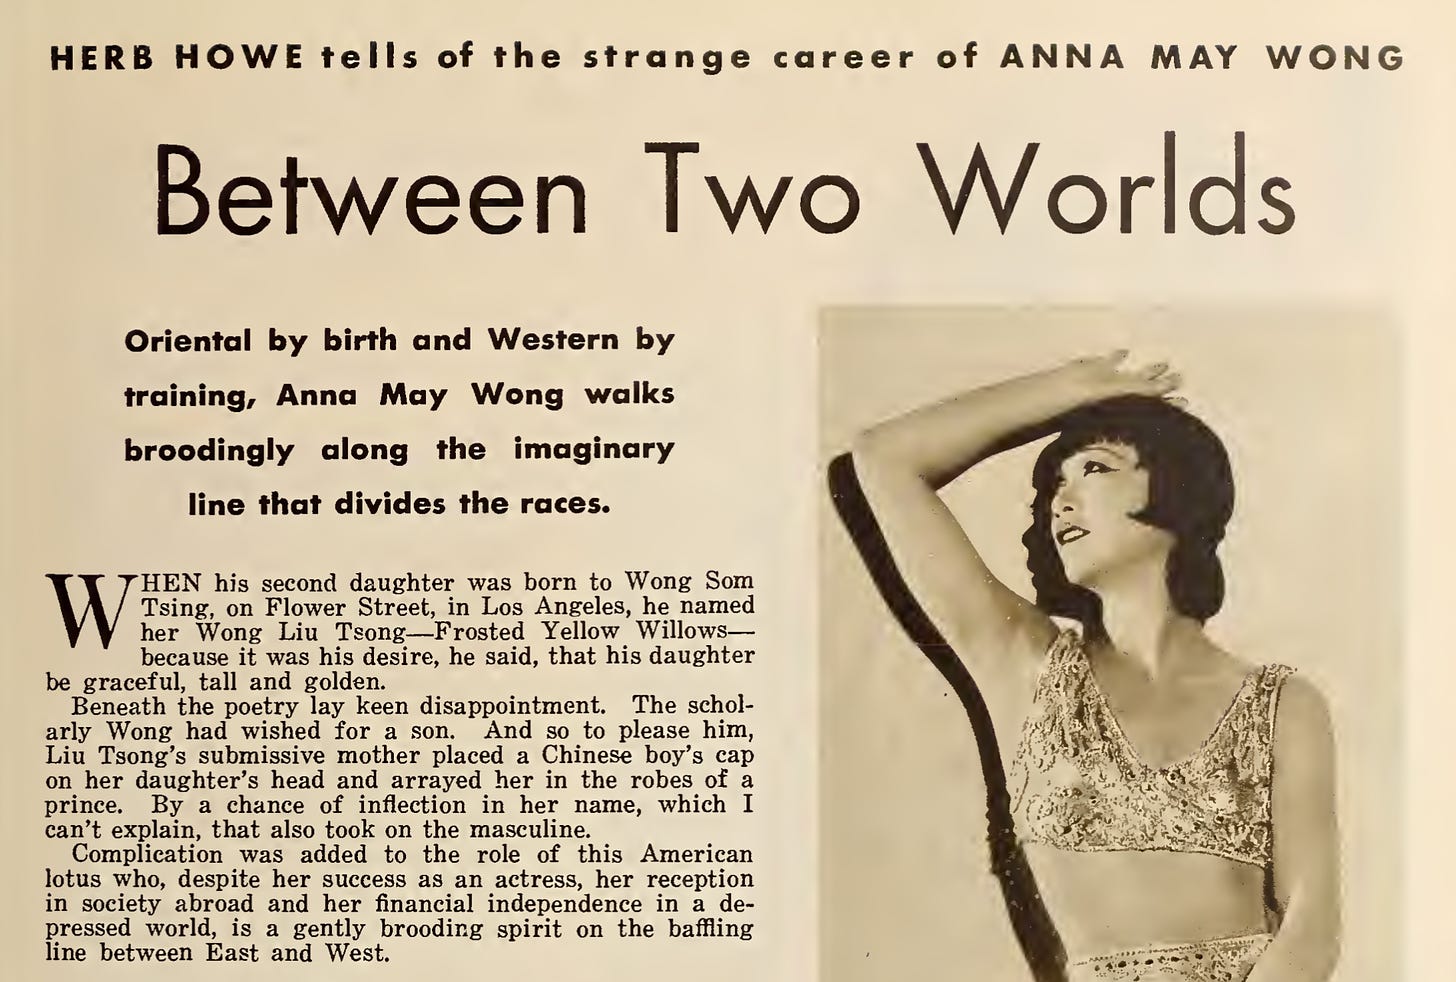 clipping of an article on Anna May Wong titled "Between Two Worlds"